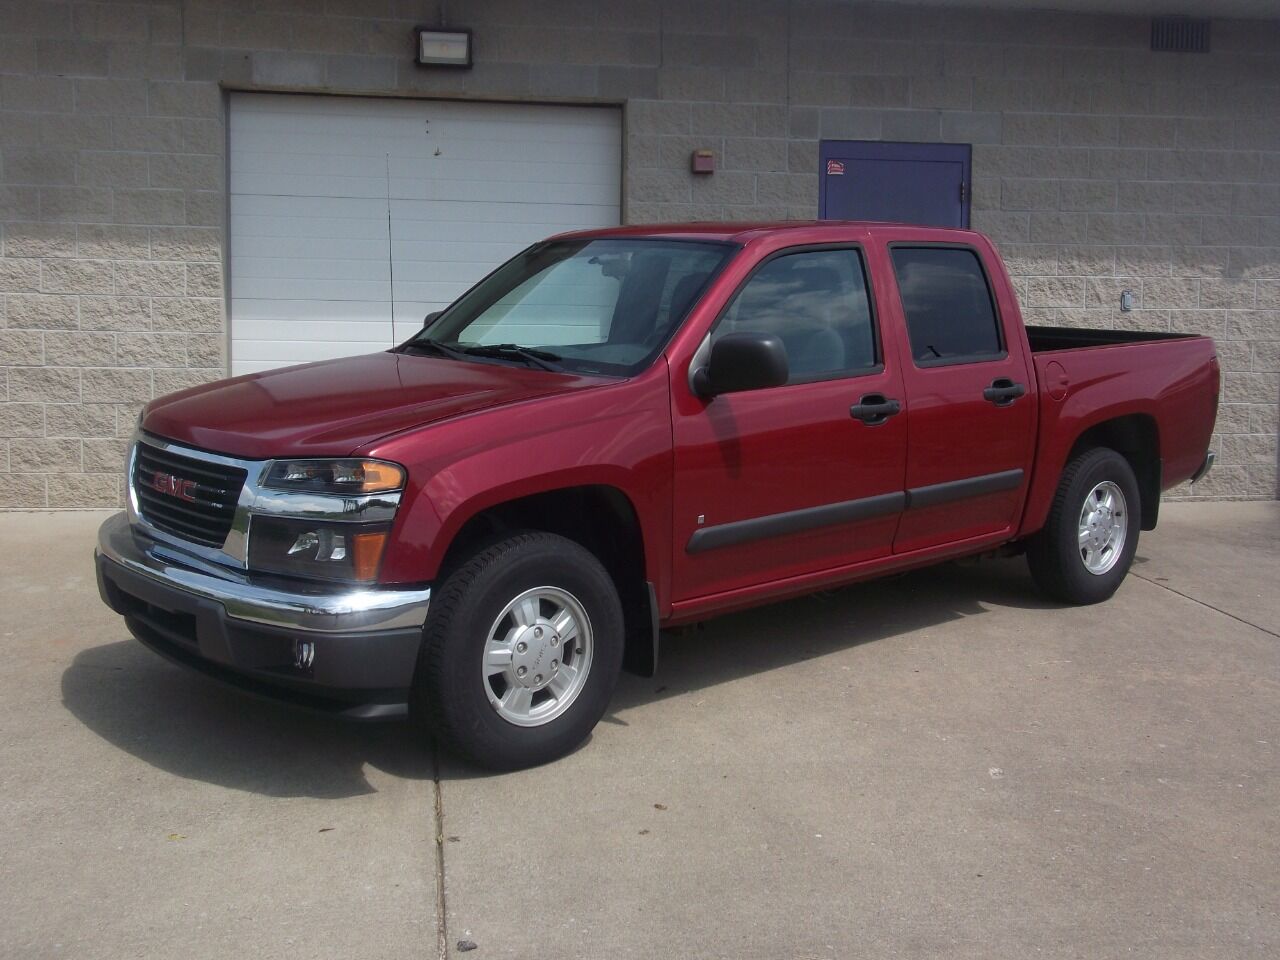 2006 GMC Canyon For Sale In Carmel, IN - Carsforsale.com®